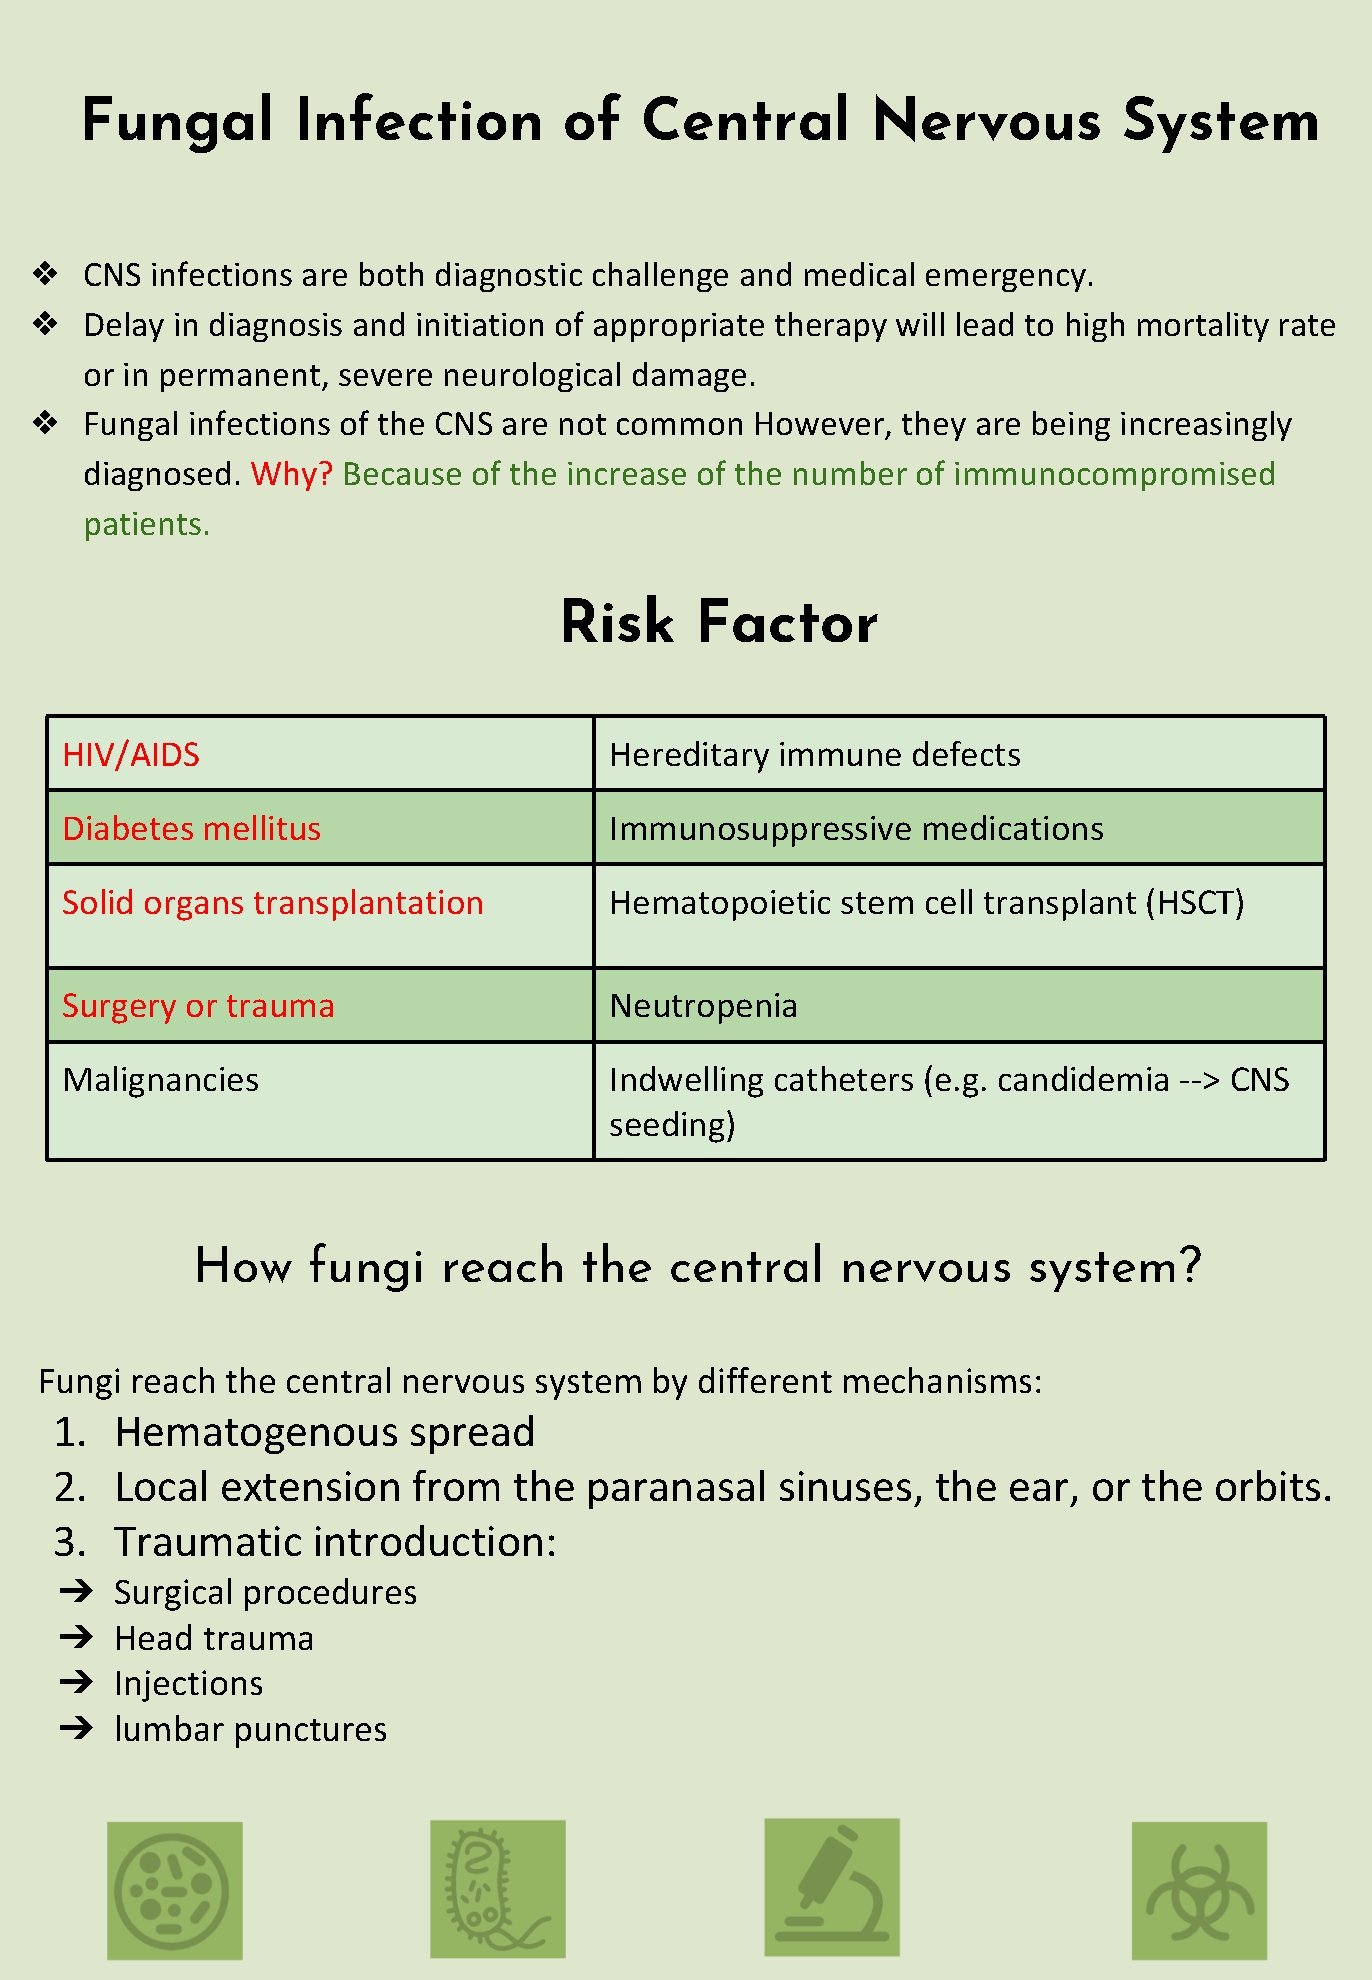 Fungal Infection of Central Nervous System ❖ CNS infections are both diagnostic challenge and